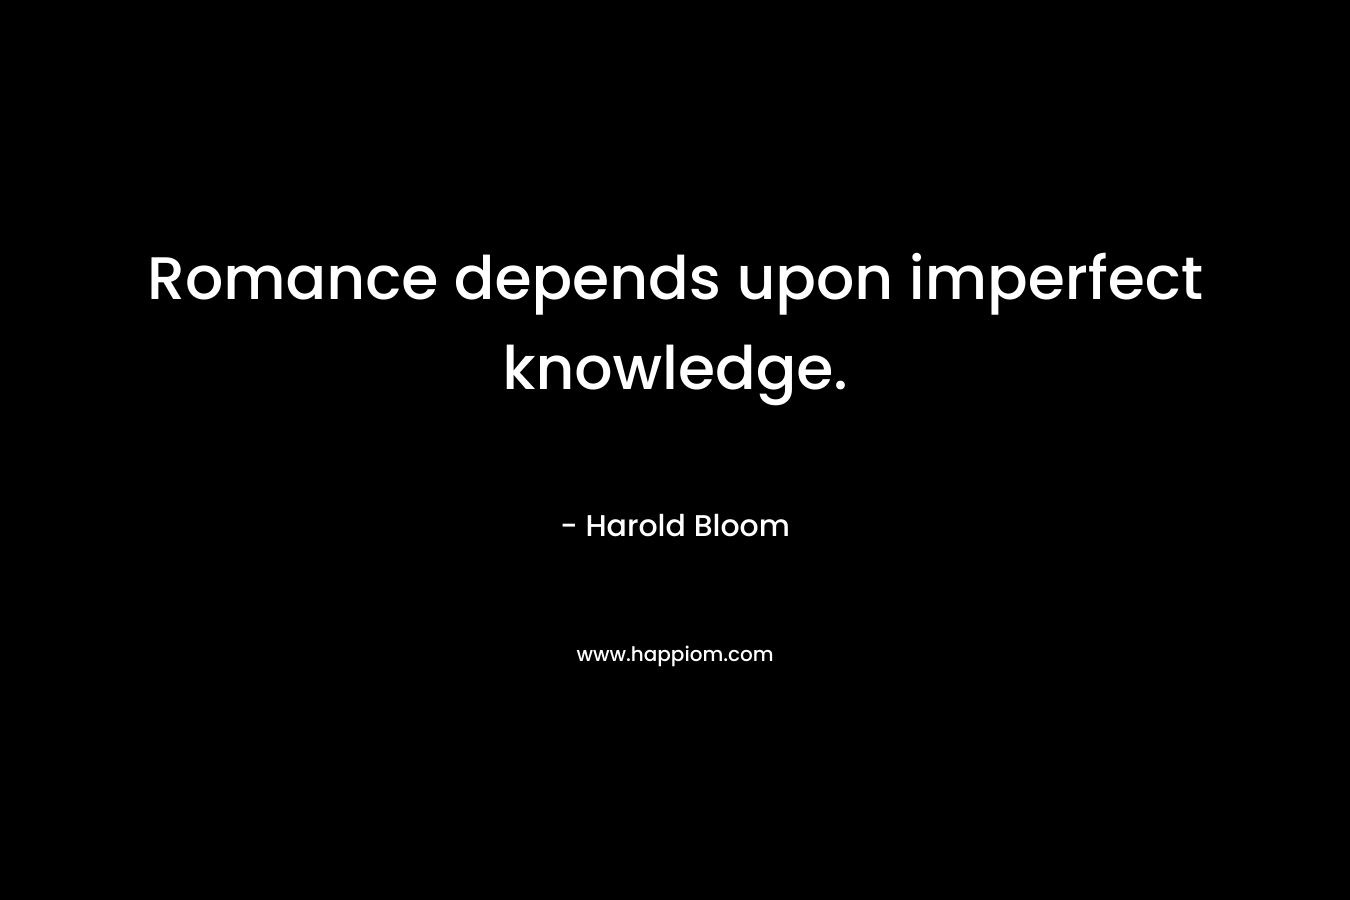 Romance depends upon imperfect knowledge. – Harold Bloom